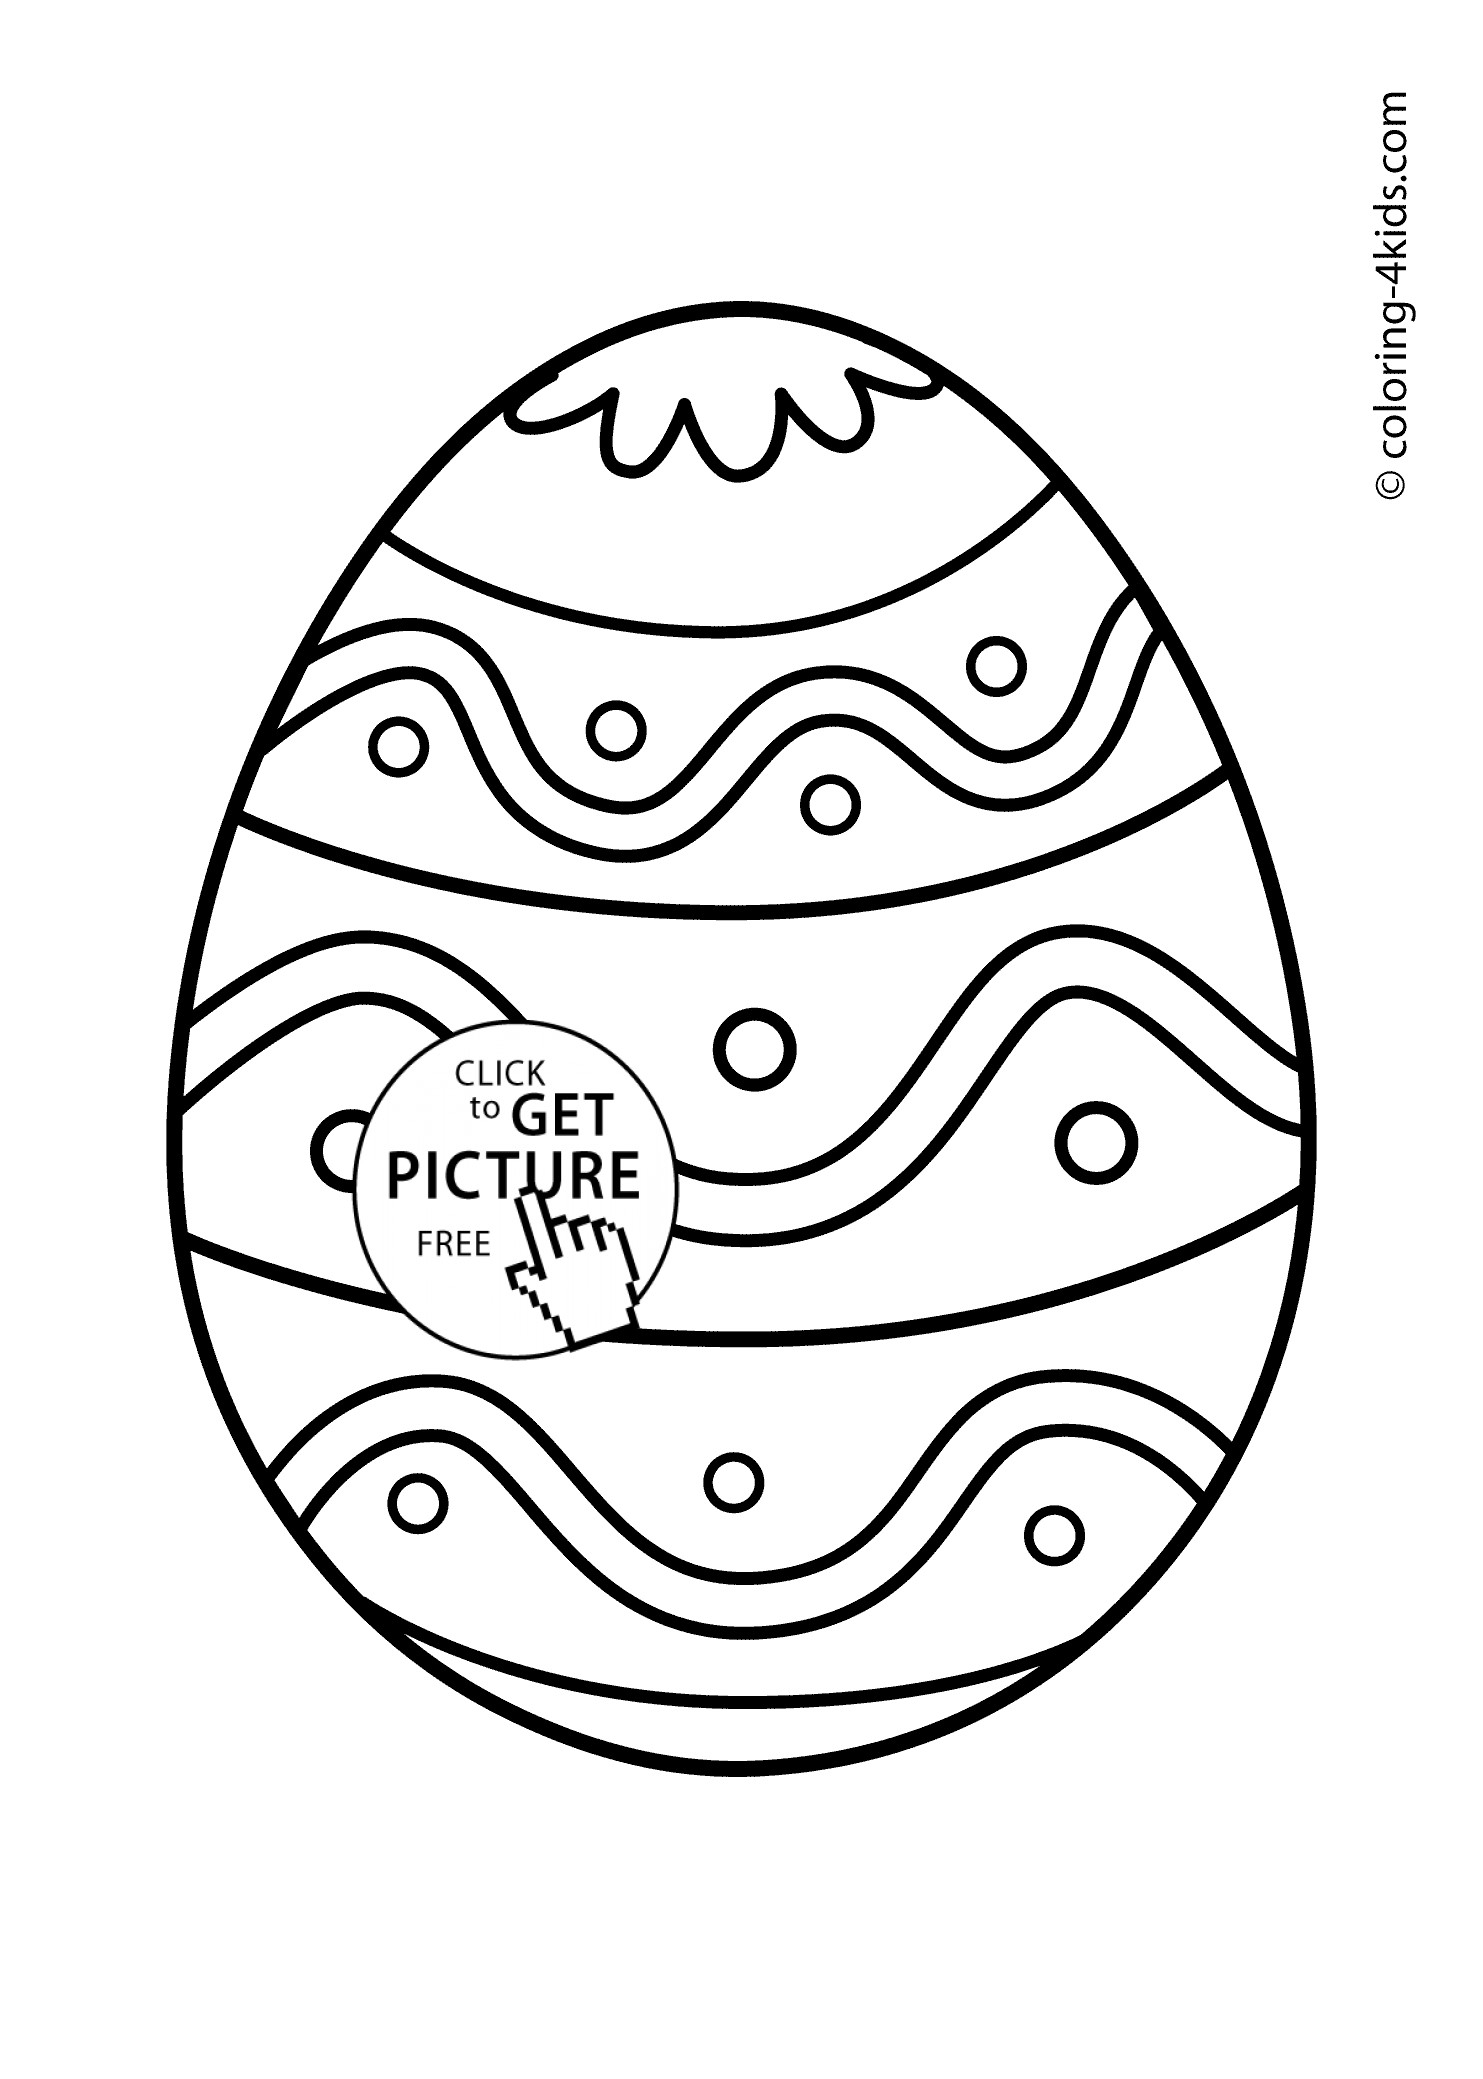 Egg Coloring Pages
 Easter egg coloring pages for kids prinables Easter